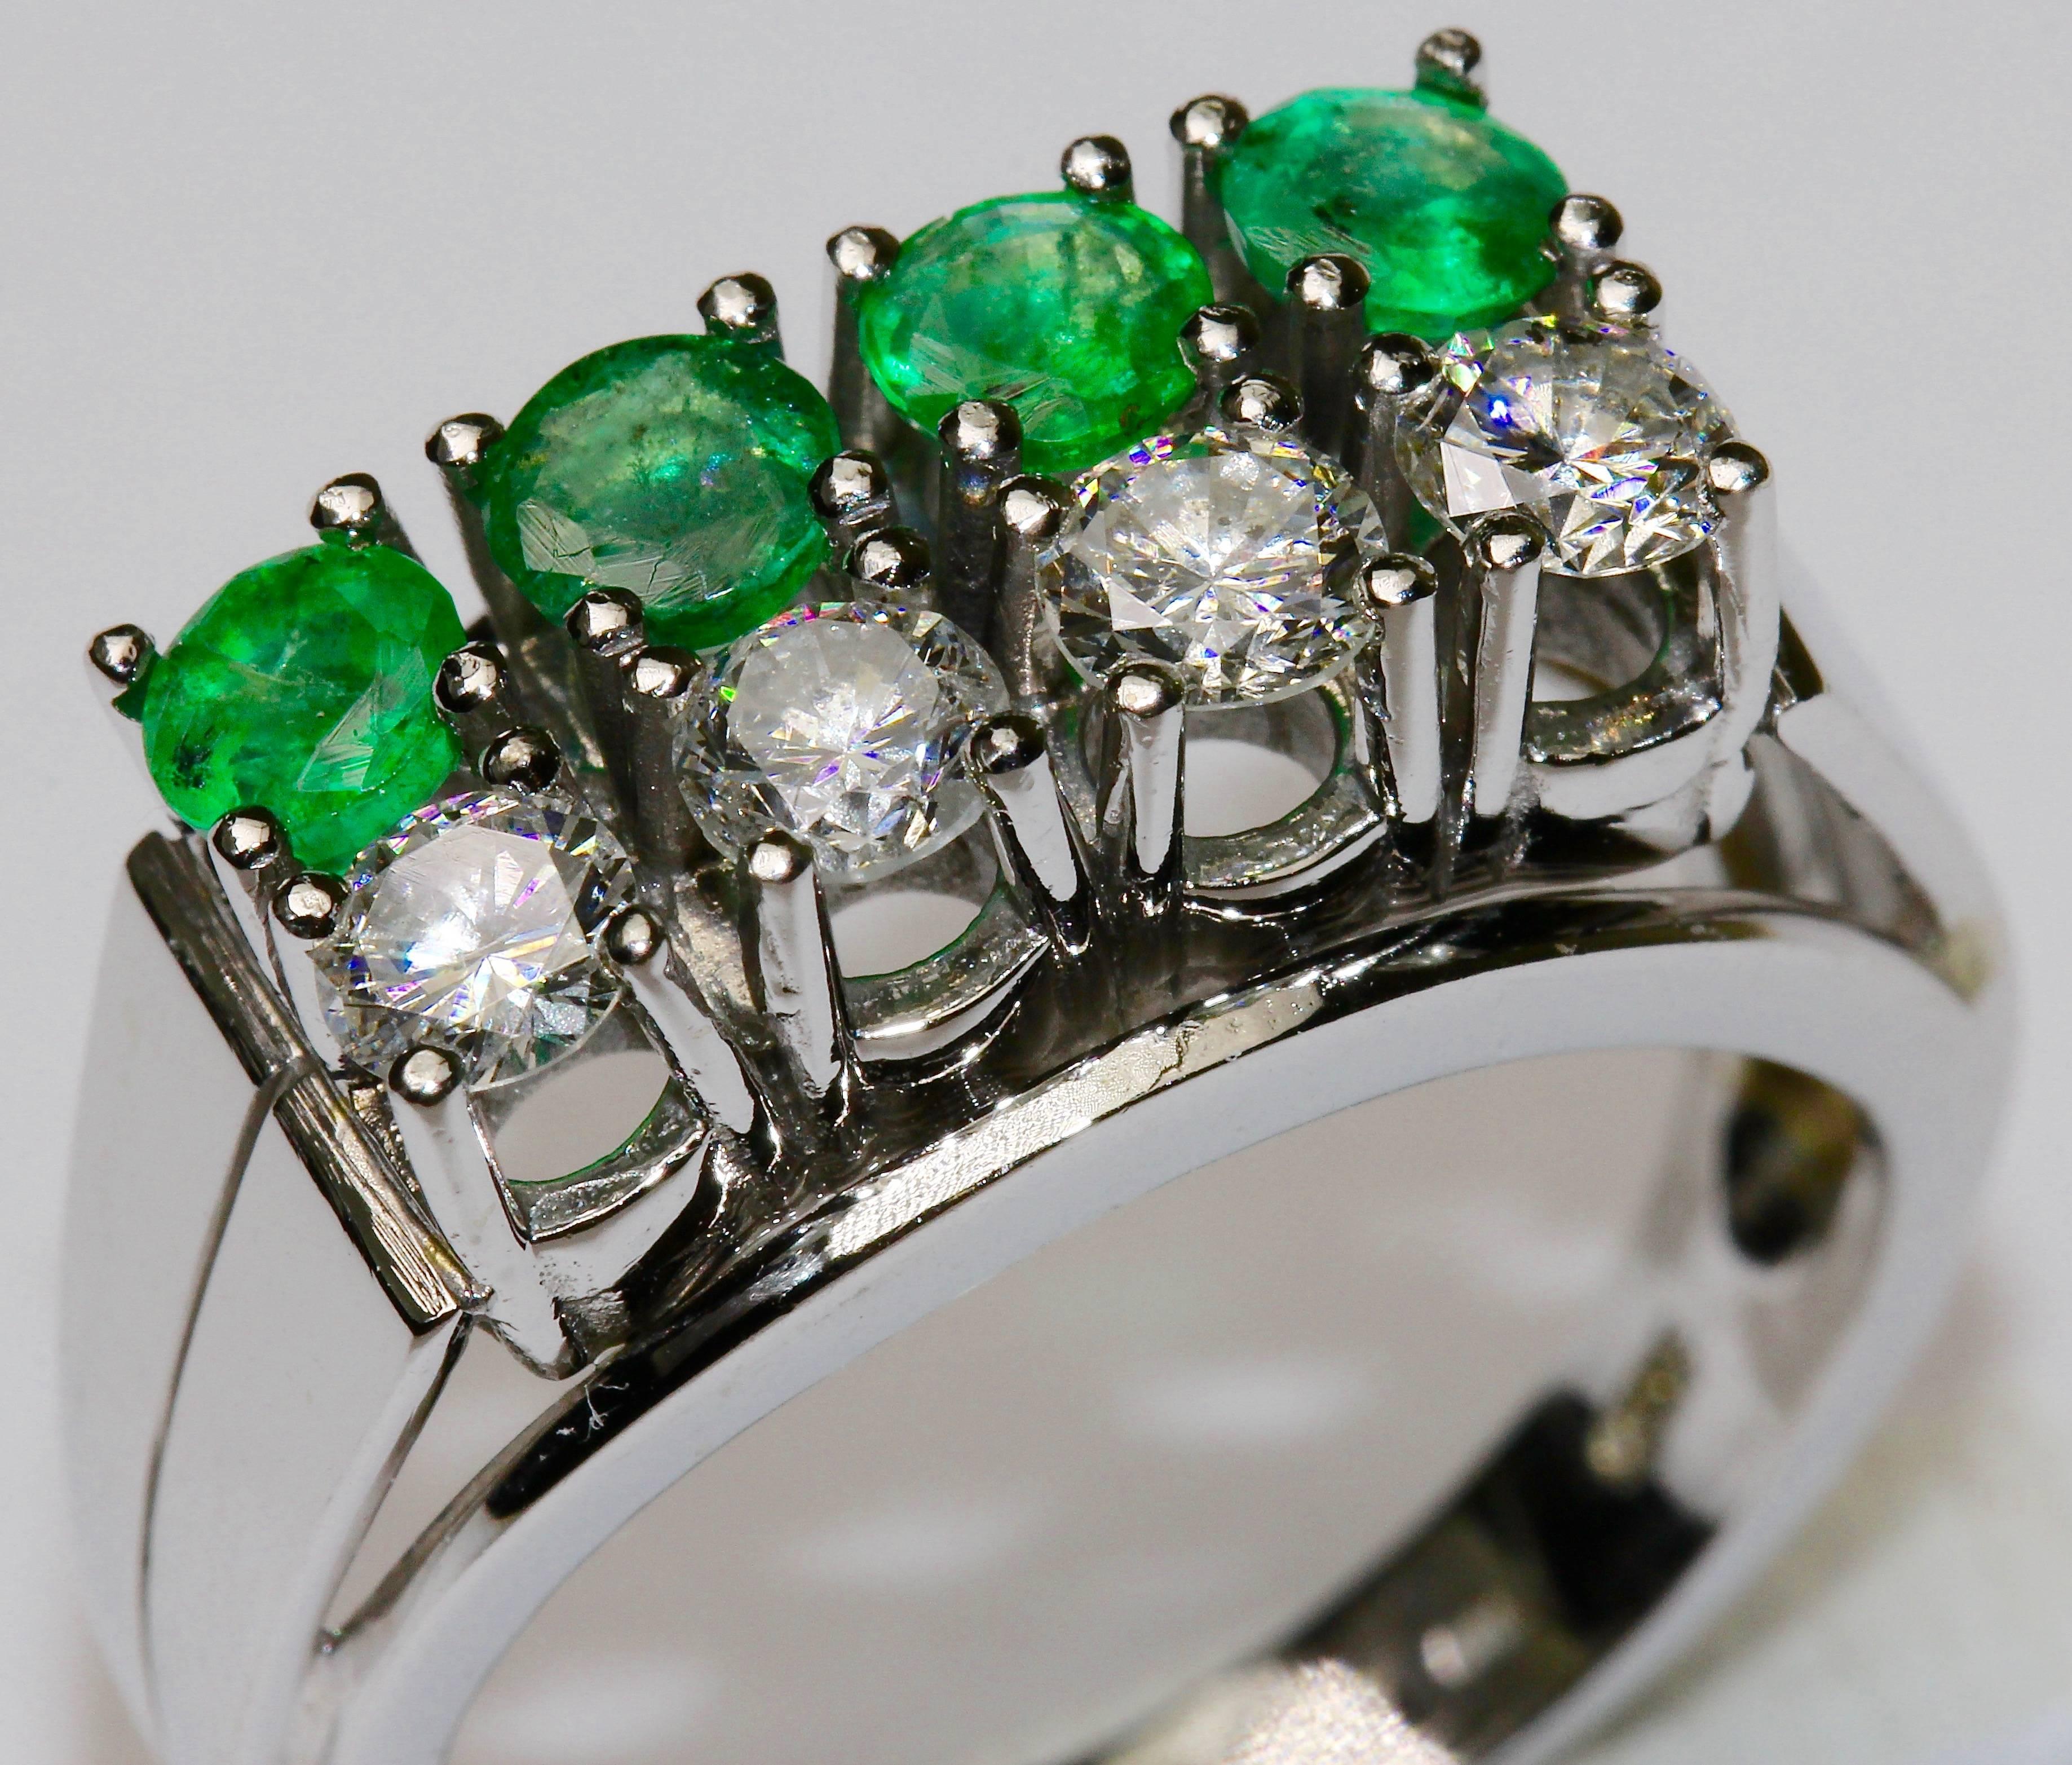 Charming ladies white gold ring, set with four round diamonds and four emeralds.
Diamonds: Approx. 0.18 ct. each, fine white, VSI to Si
Emeralds each about 0.2 to 0.23 ct.

Hallmarked.